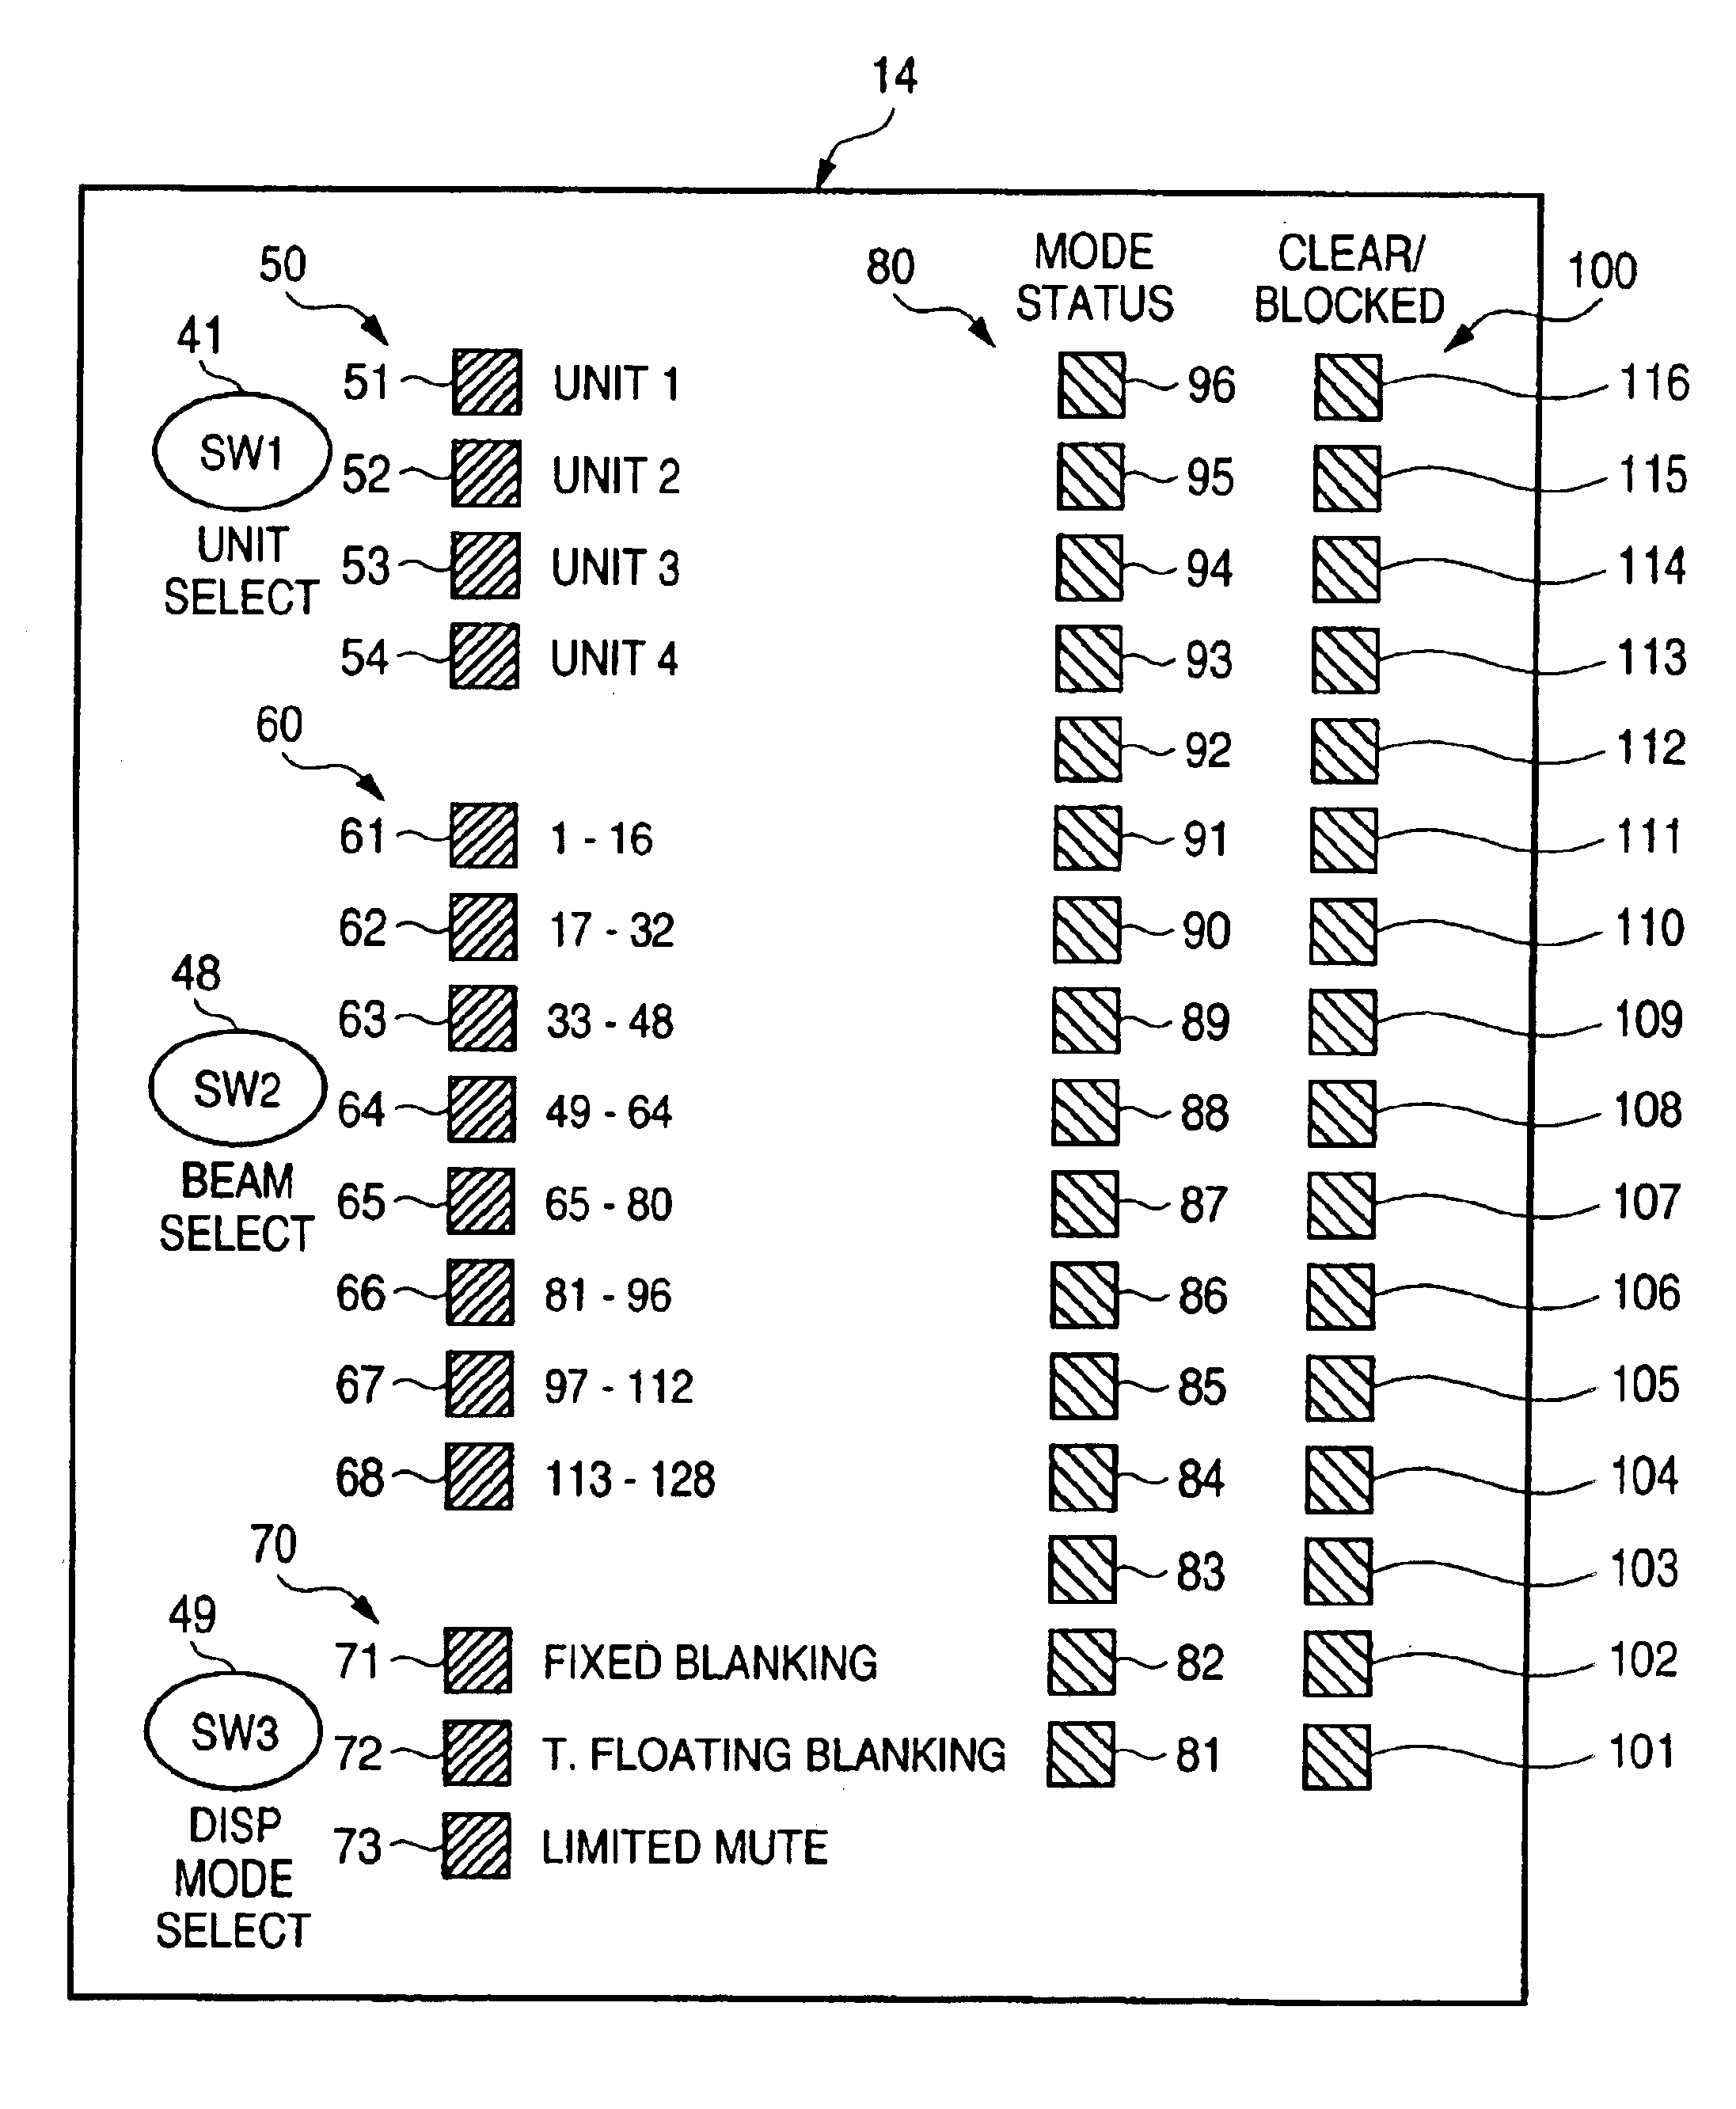 Display monitor for multi-optical-path photoelectric safety apparatus and multi-optical-path photoelectric safety apparatus including a display monitor